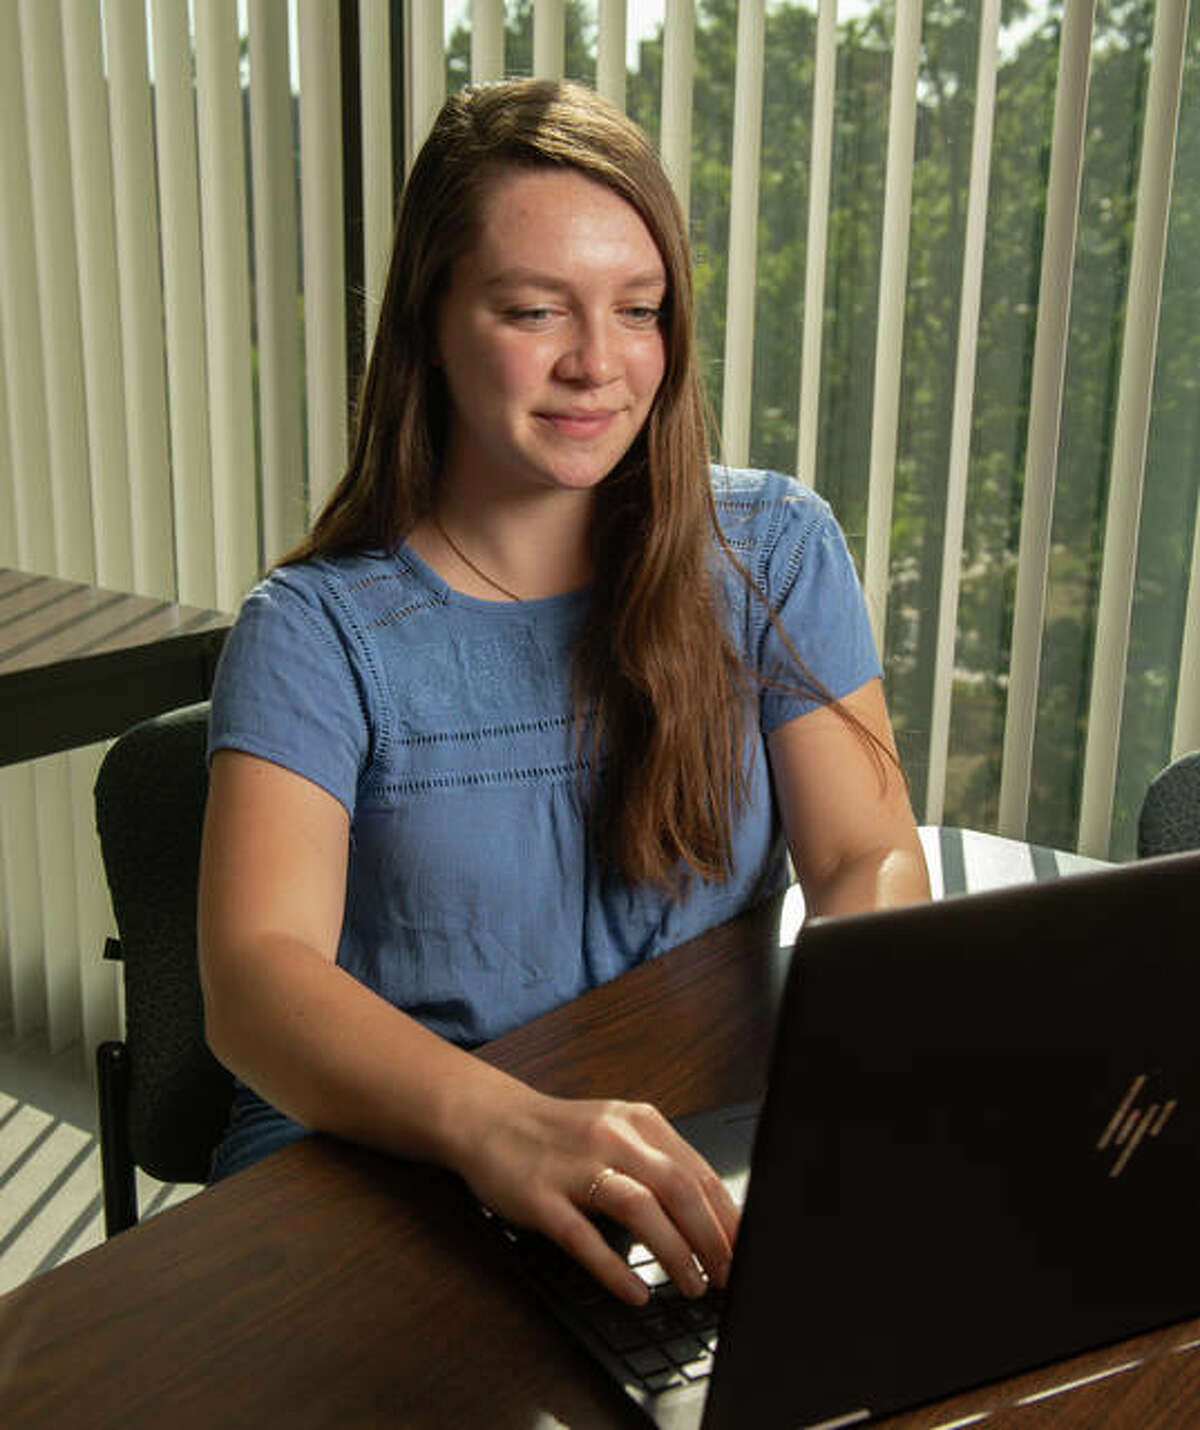 An SIUE student works at her laptop. SIUE’s Graduate School is hosting a series of virtual Open House events in October.